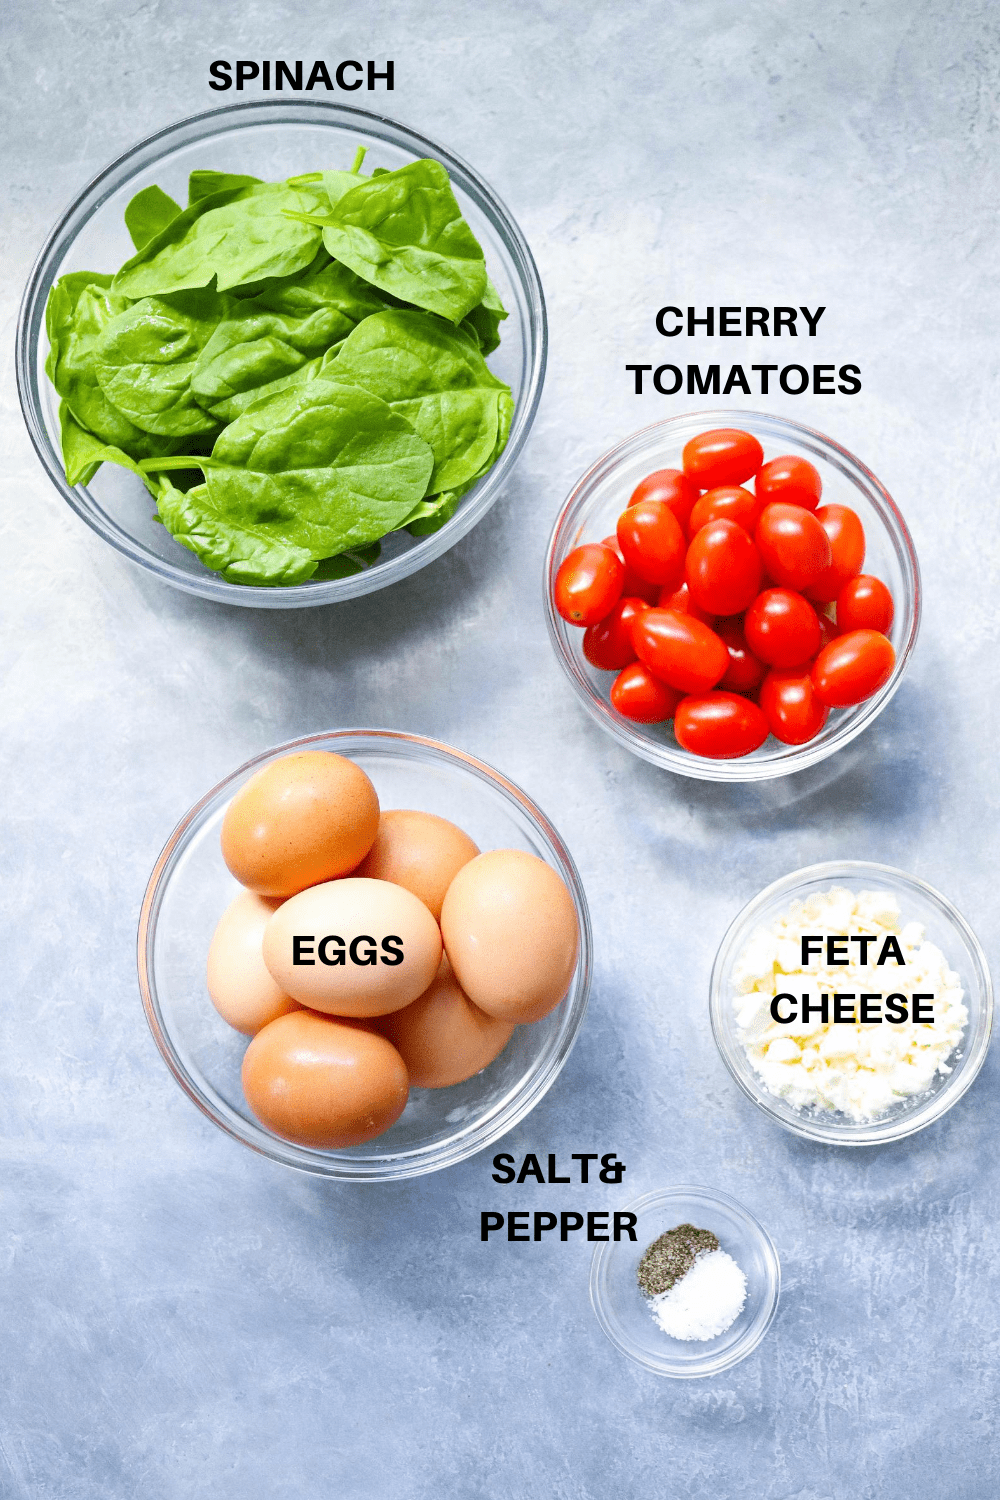 spinach in a round glass bowl with a bowl filled with cherry tomatoes next to it and a bowl of eggs in front of it. 